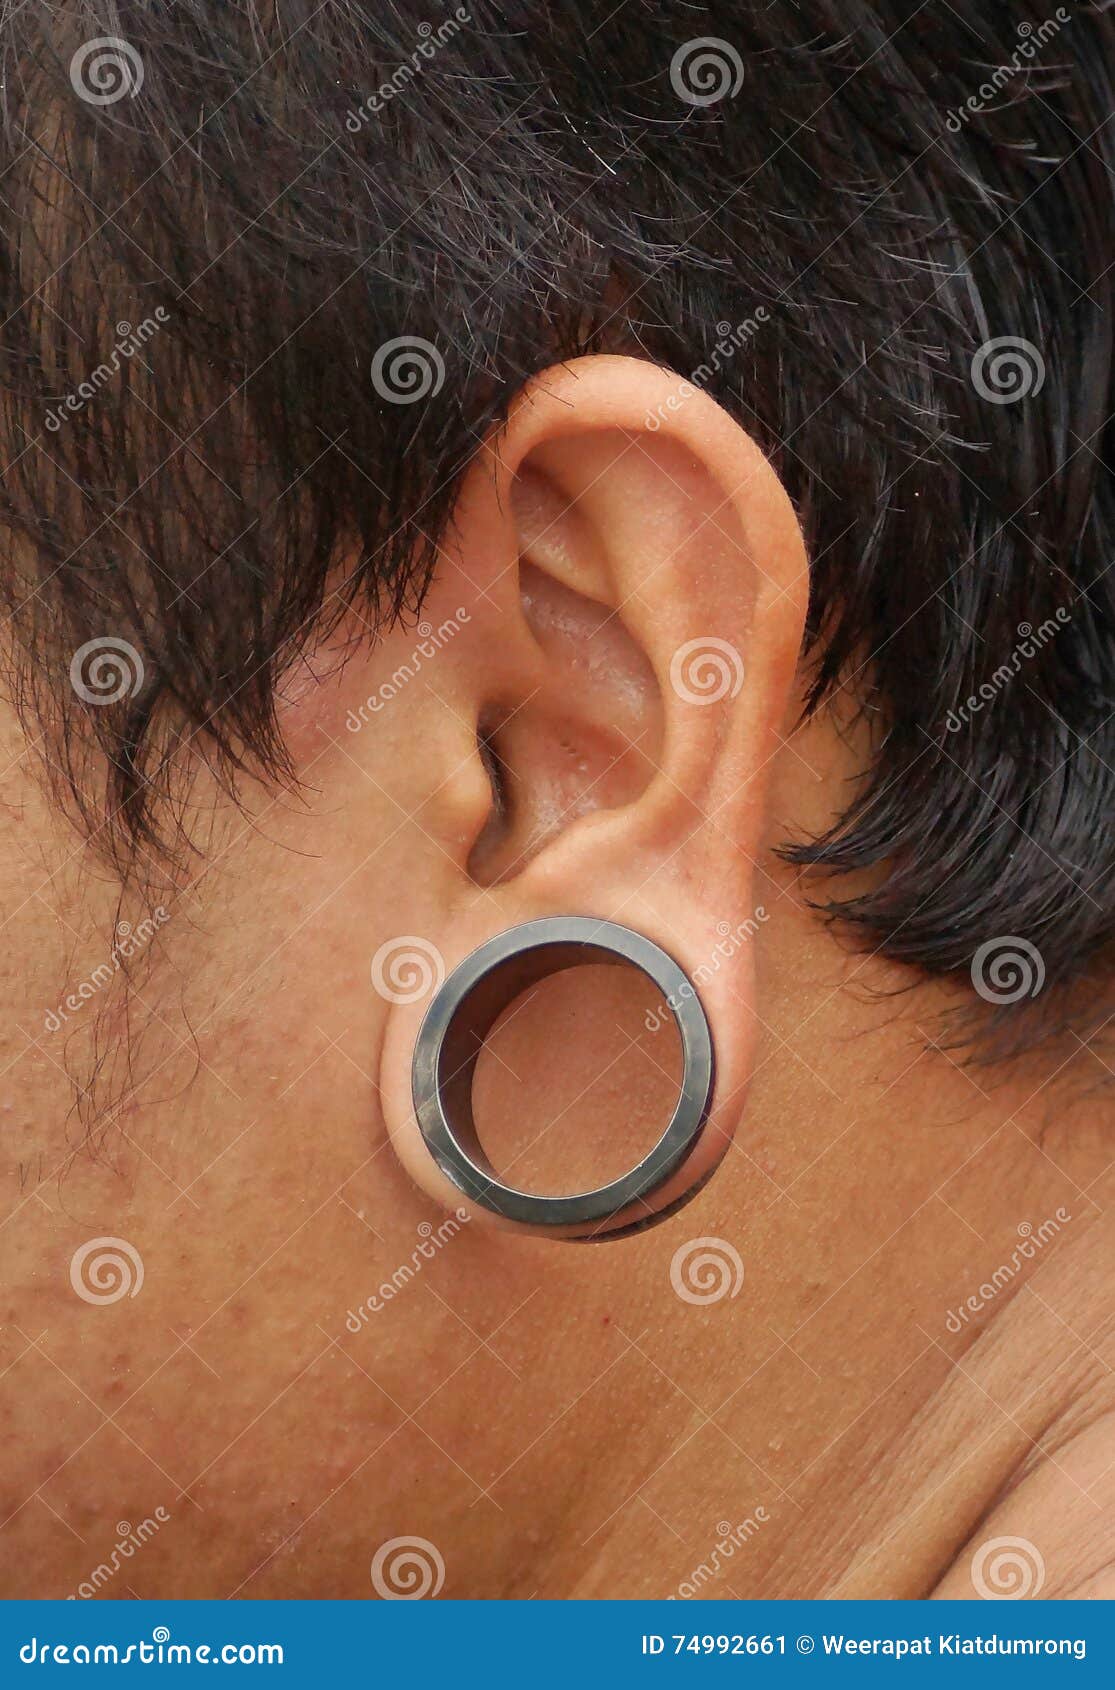 Male ear with a ring stock photo. Image of jewelry, piercing - 74566308